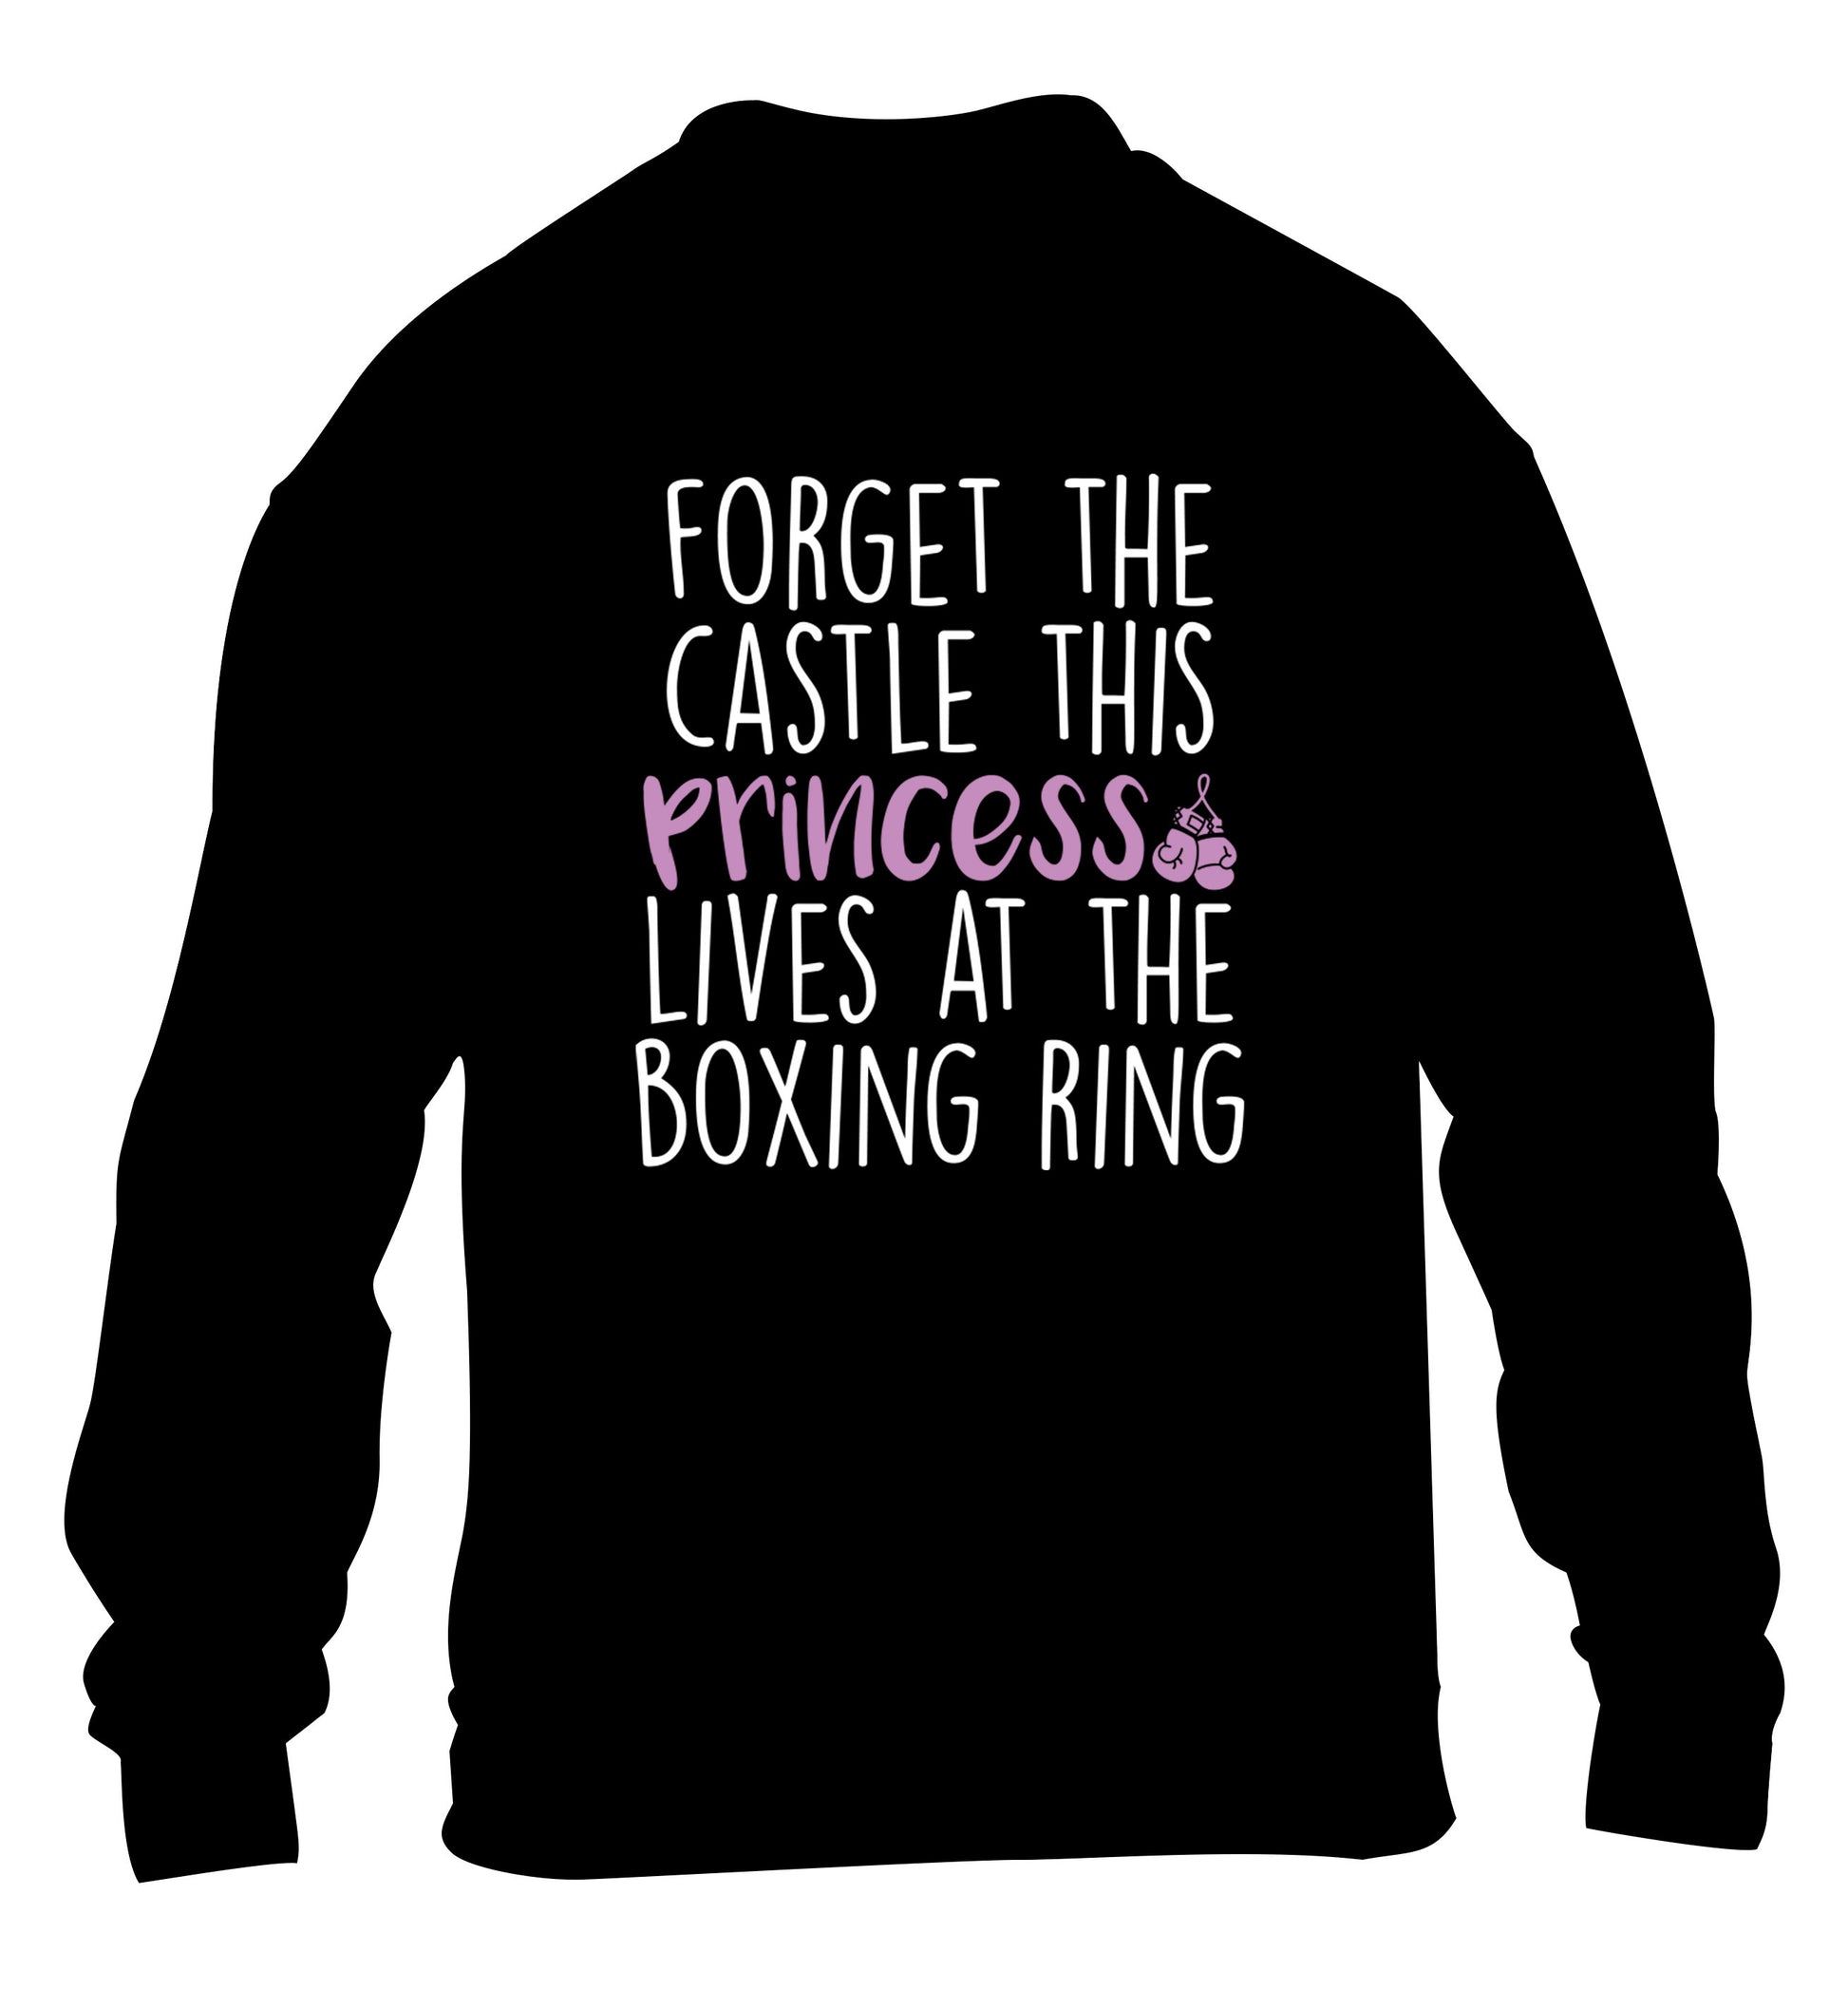 Forget the castle this princess lives at the boxing ring children's black sweater 12-14 Years